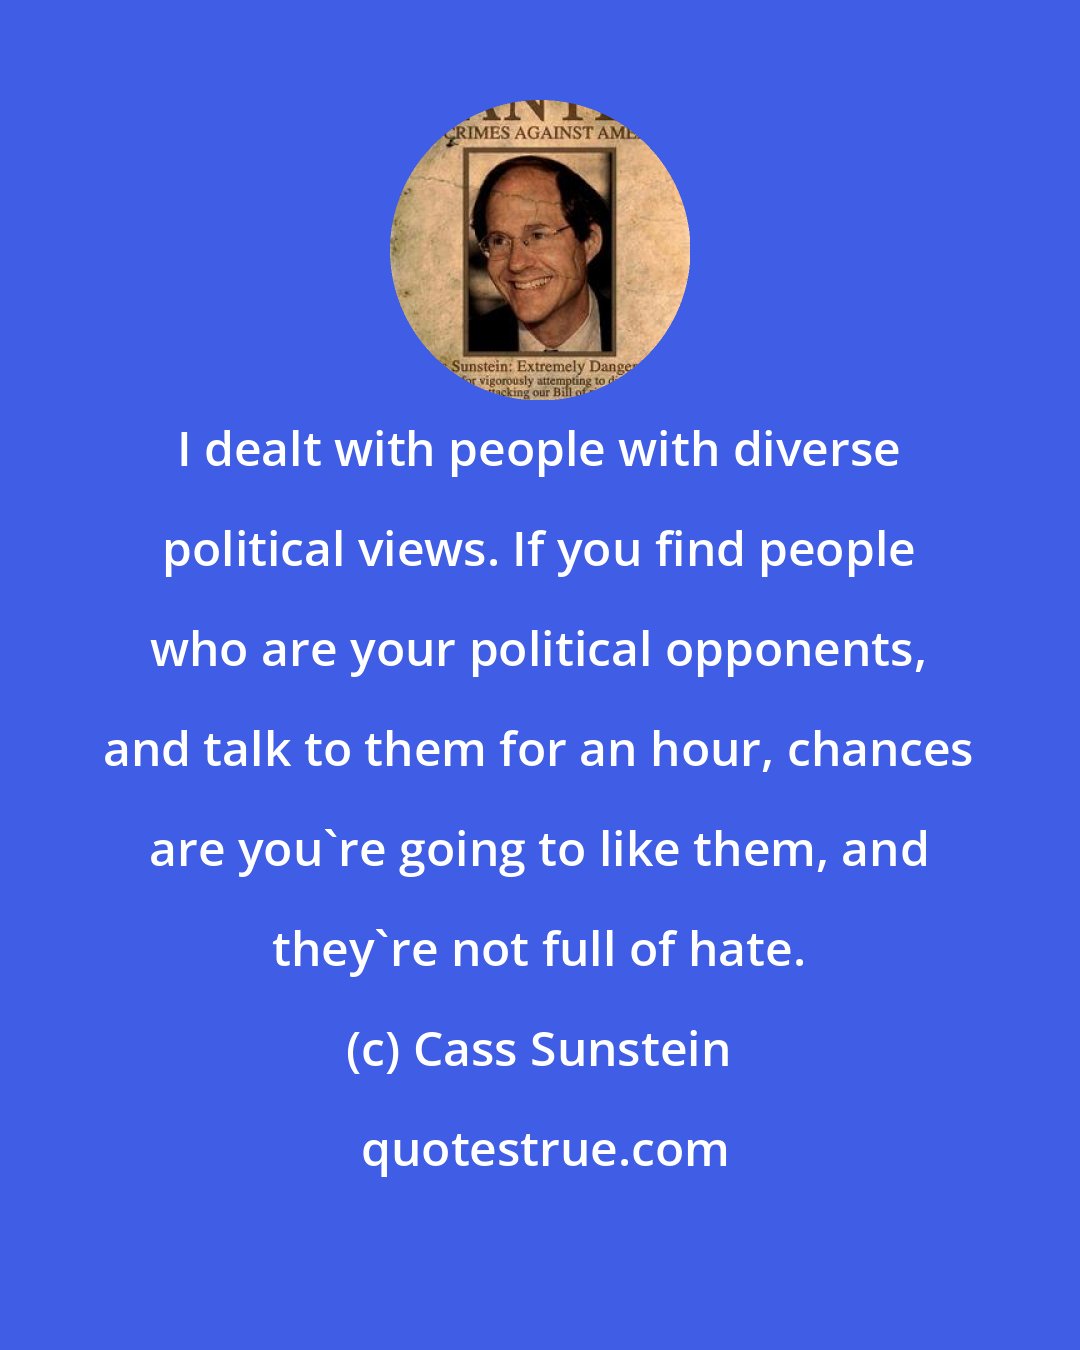 Cass Sunstein: I dealt with people with diverse political views. If you find people who are your political opponents, and talk to them for an hour, chances are you're going to like them, and they're not full of hate.